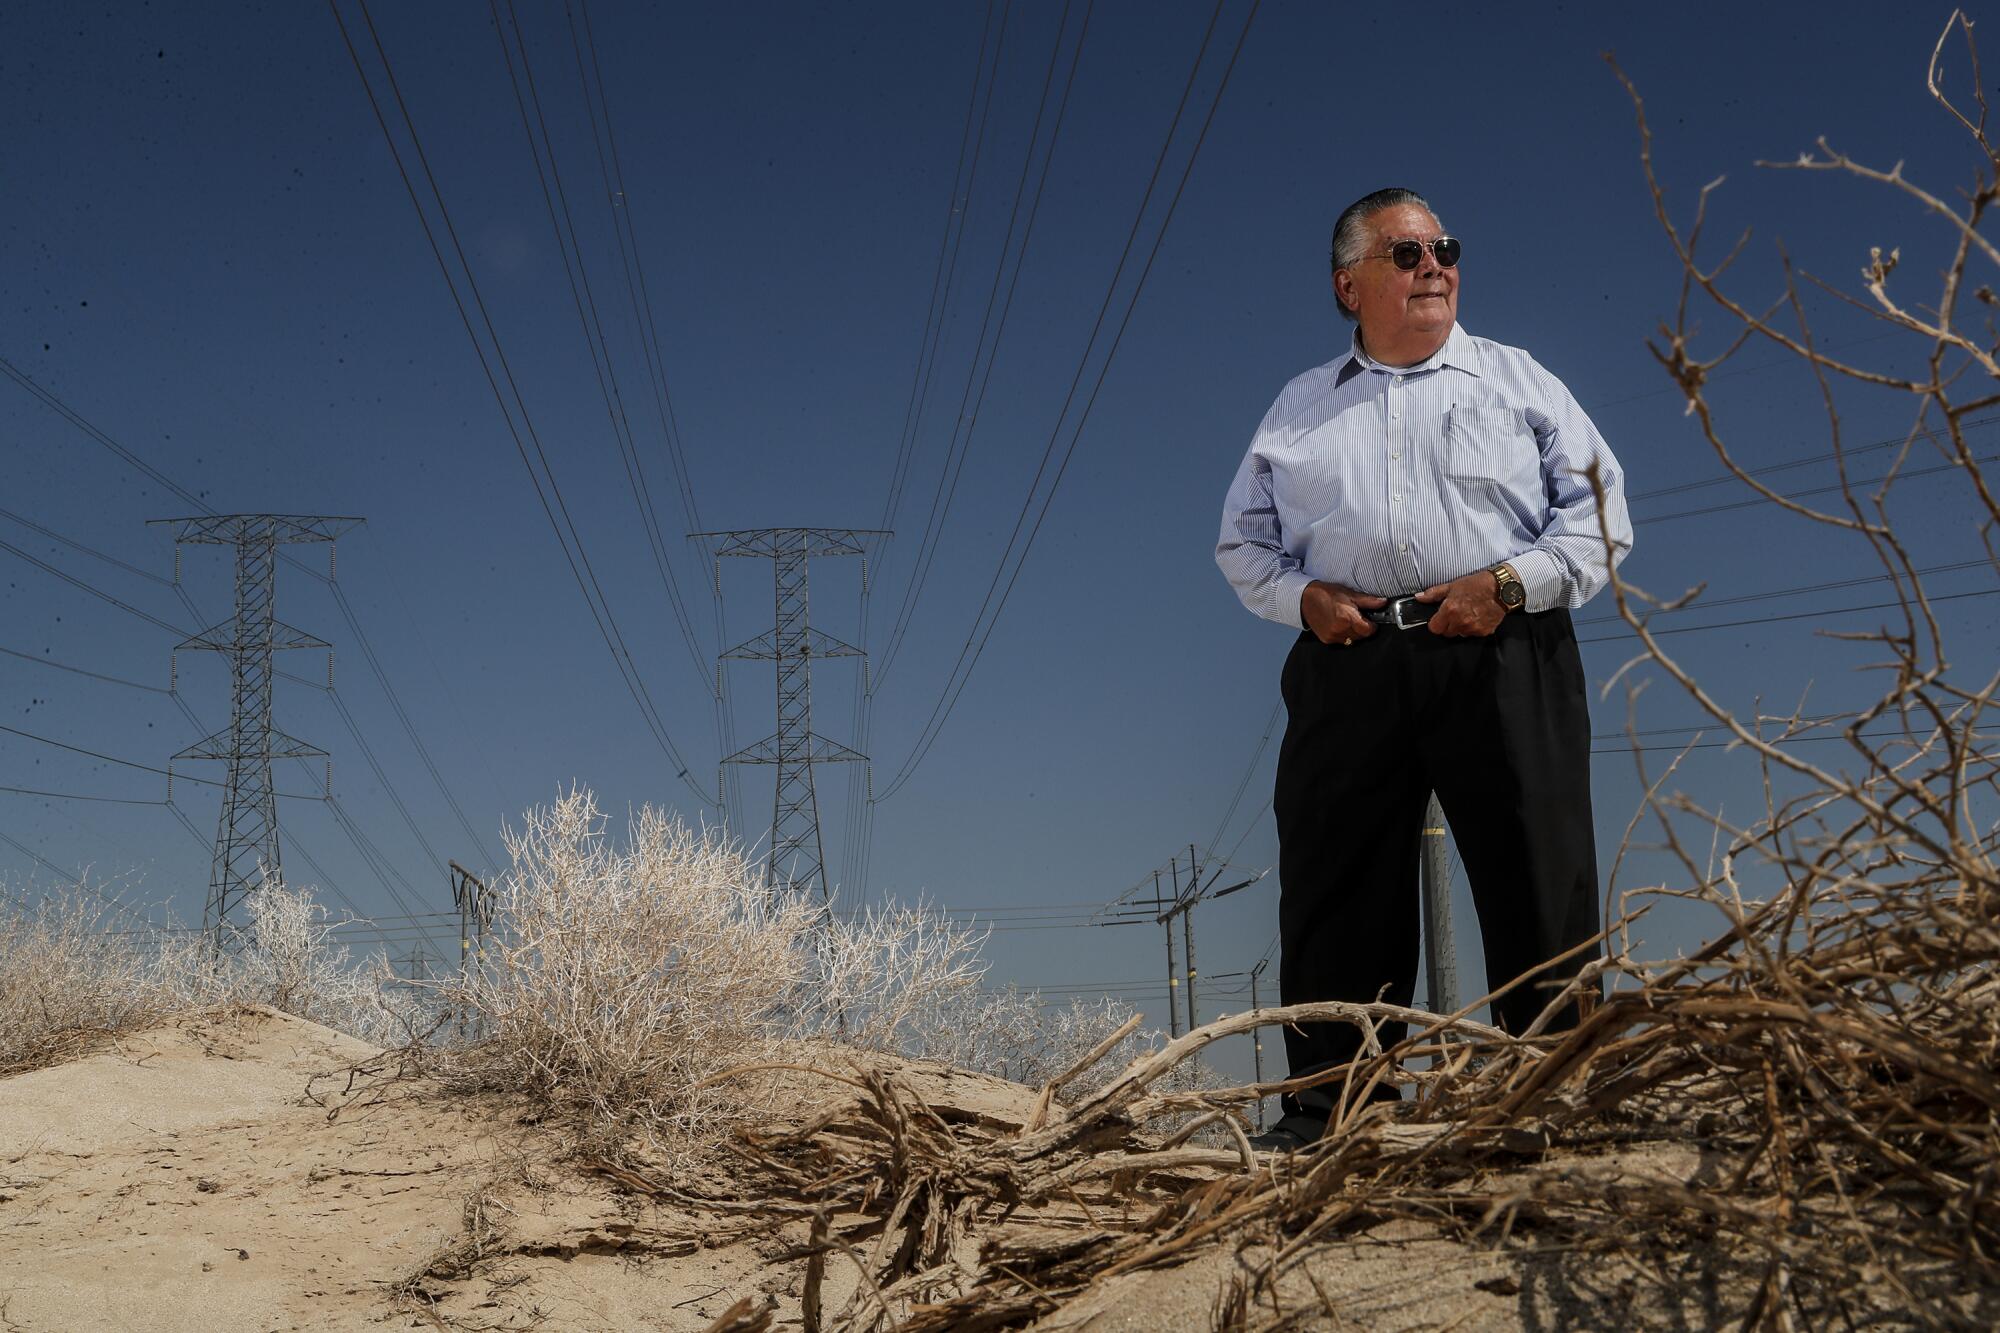 Then-Imperial County Supervisor Ray Castillo stands beneath transmission lines.